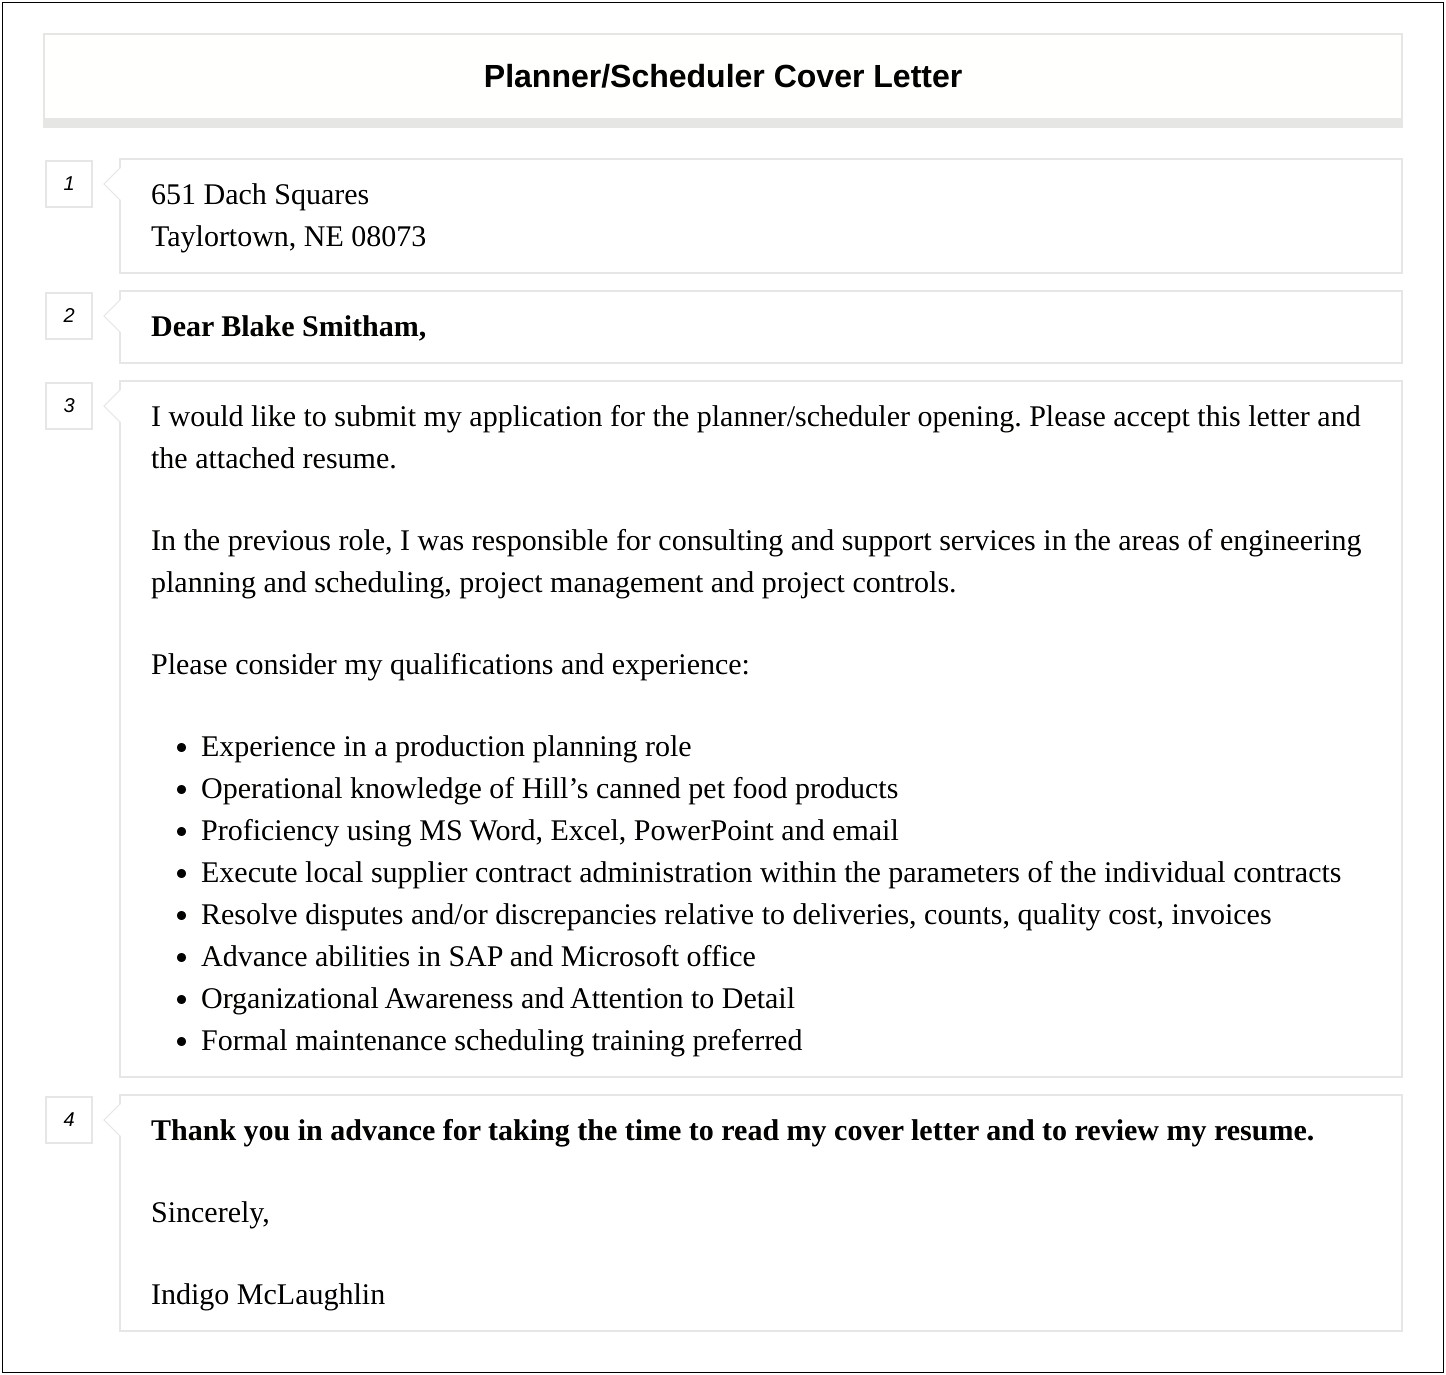 Resume Cover Letter For Scheduler Examples